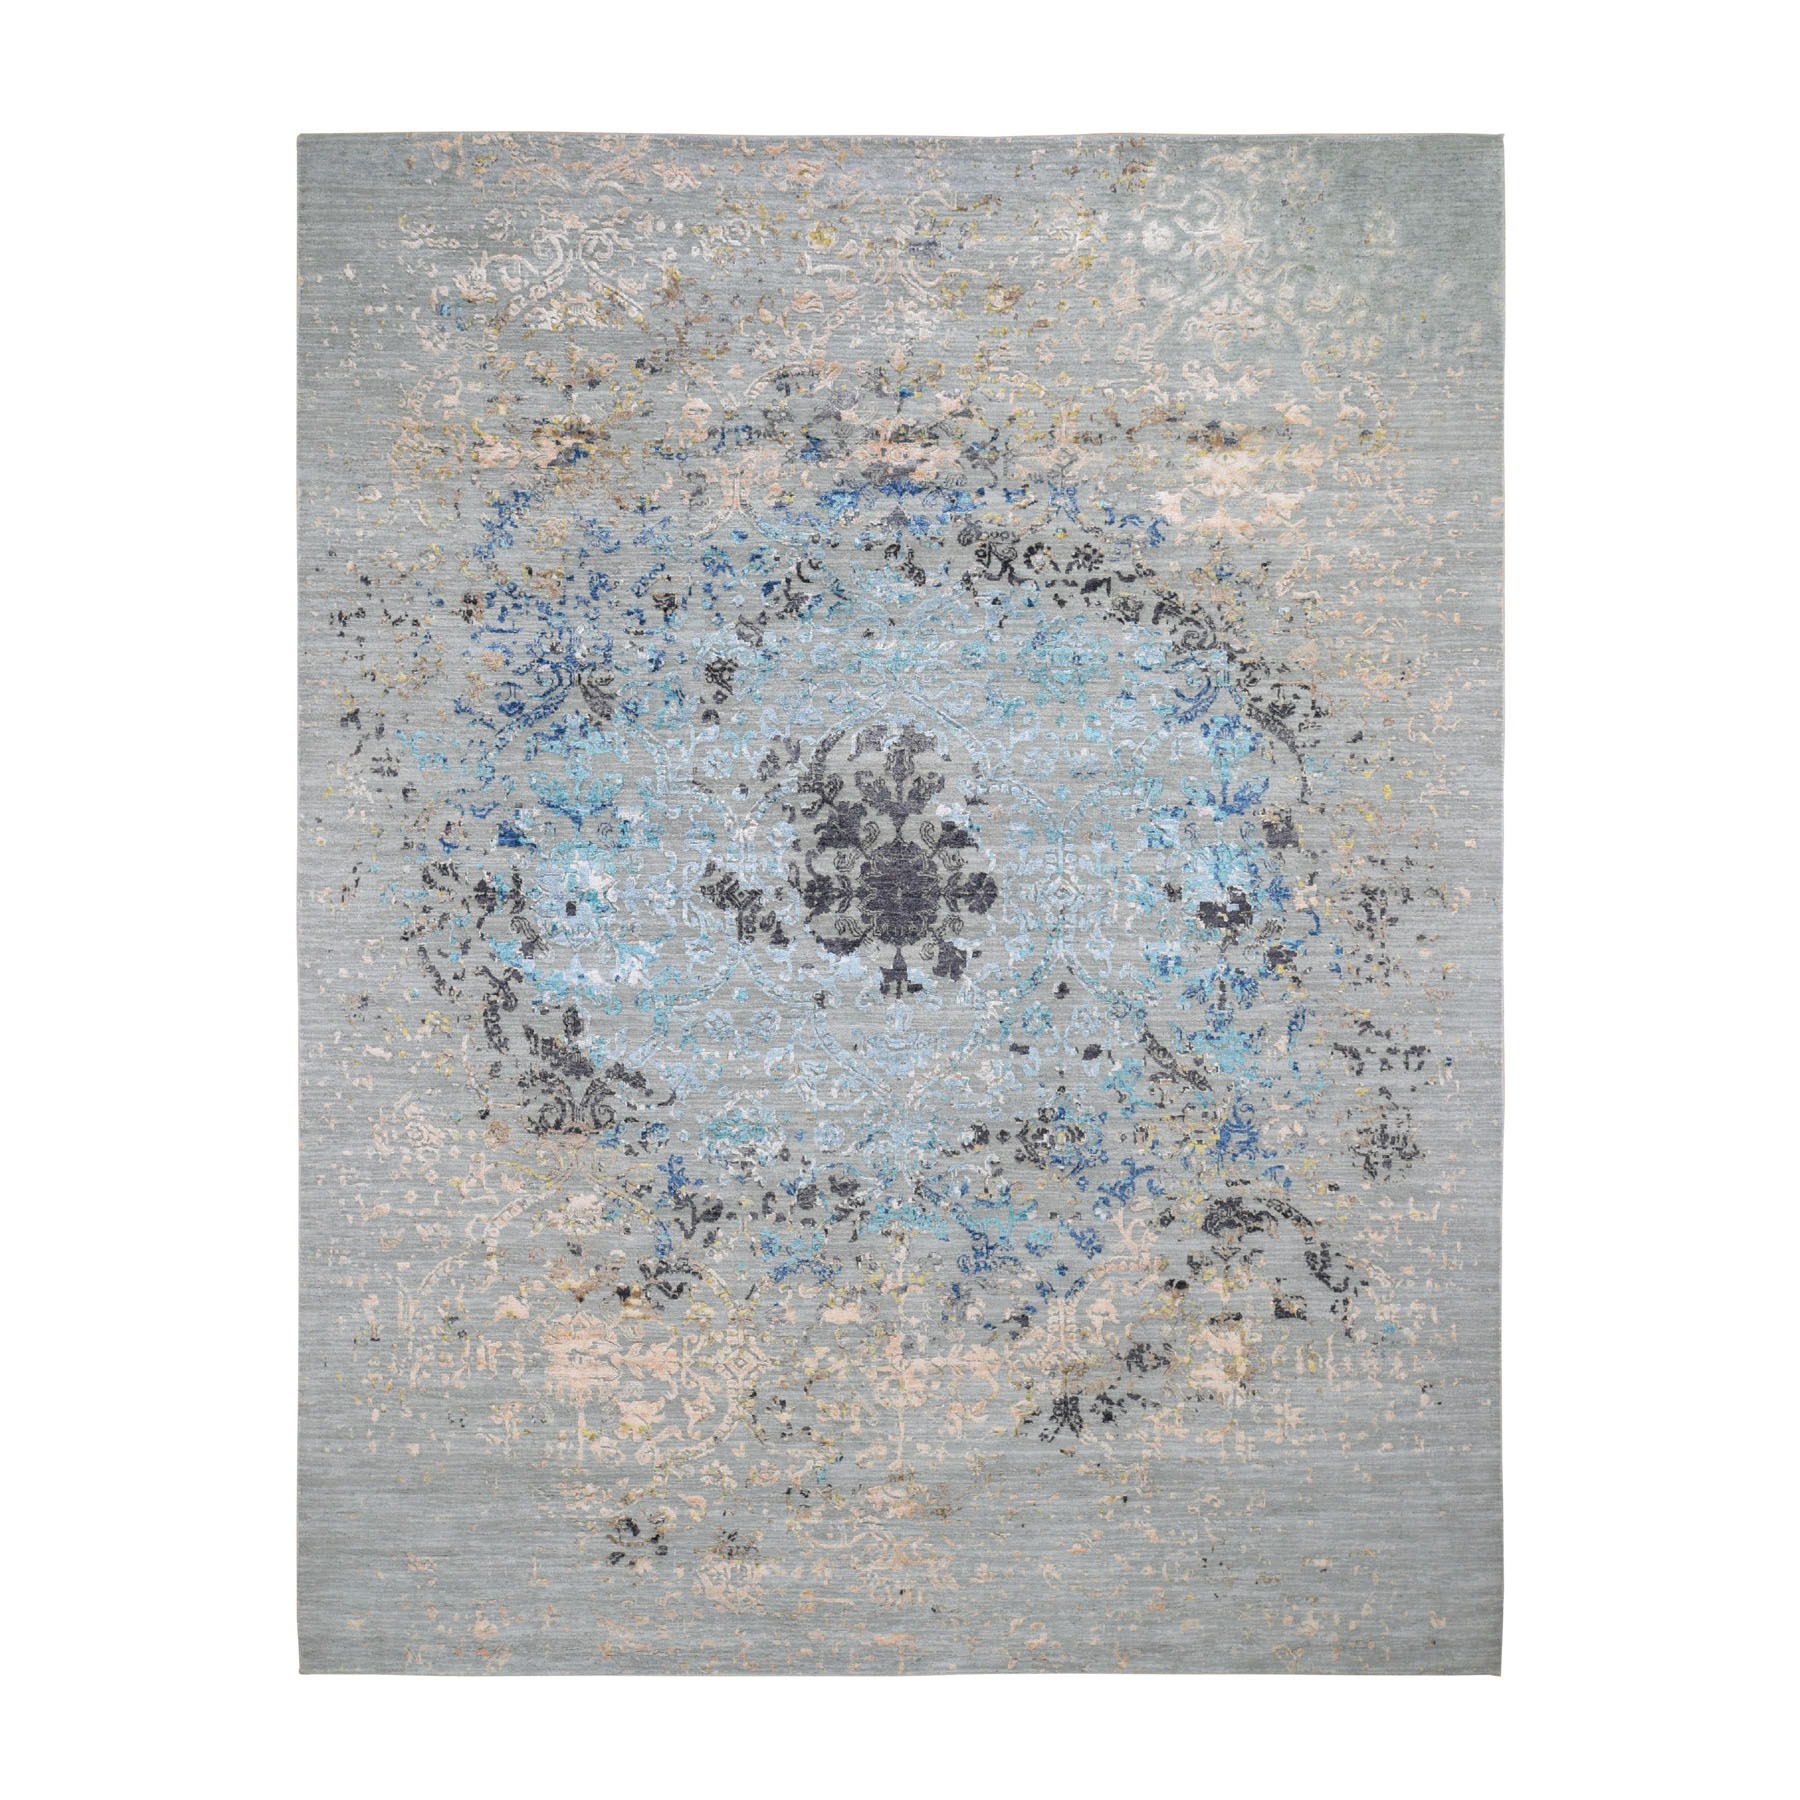 8-x10- Transitional Agra With Pop Of Color Wool And Silk Hand Knotted Oriental Rug 